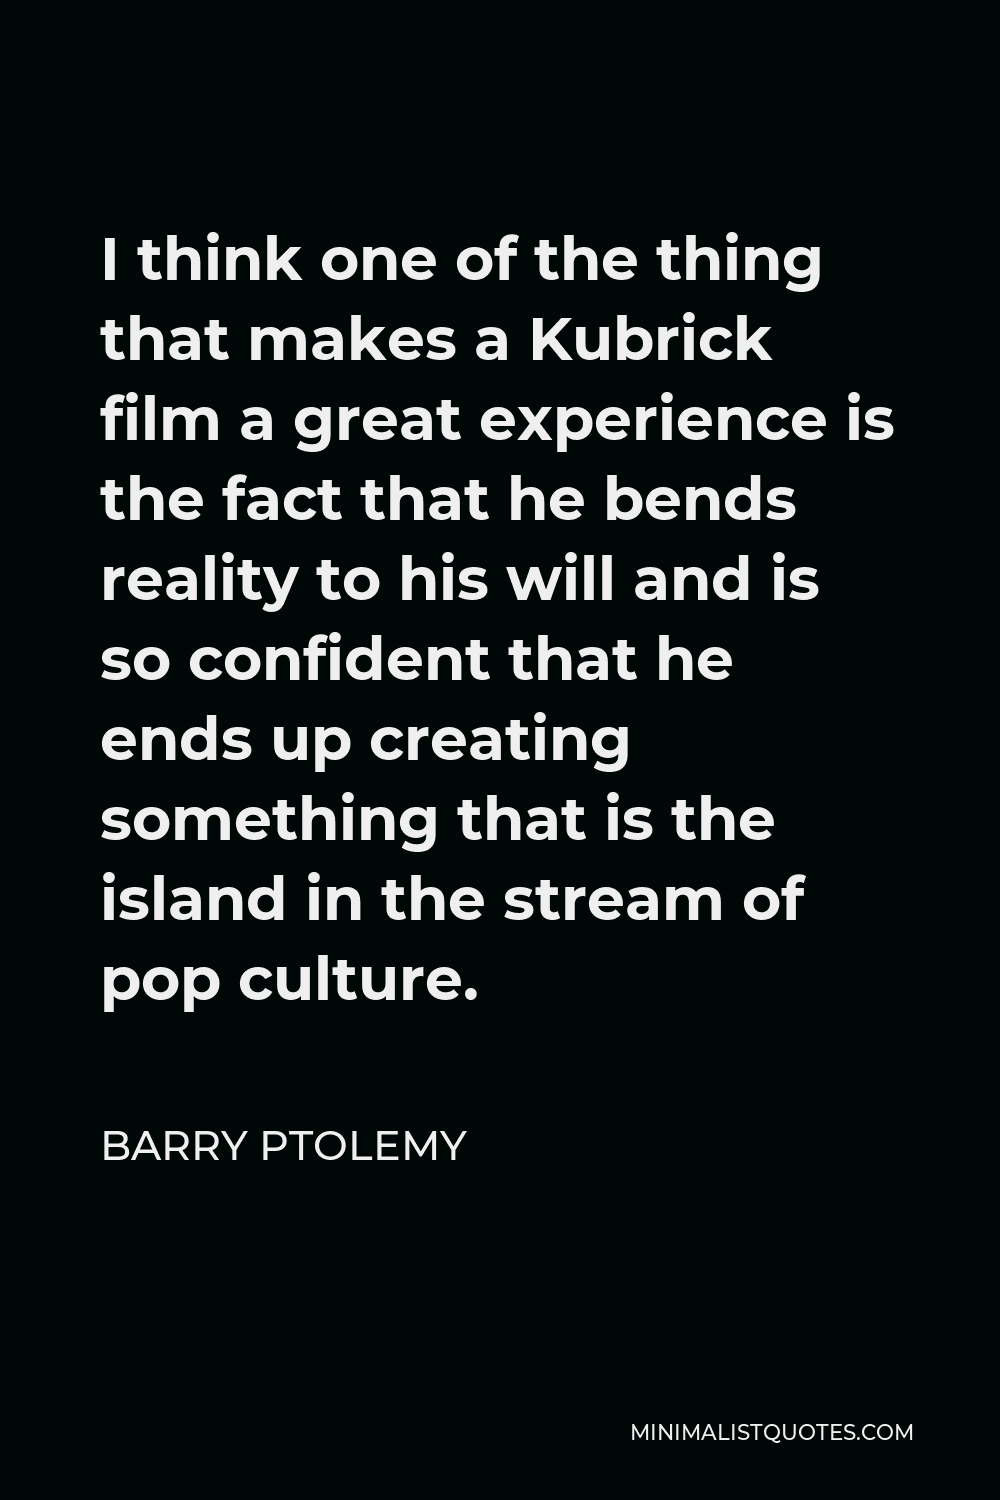 Barry Ptolemy Quote - I think one of the thing that makes a Kubrick film a great experience is the fact that he bends reality to his will and is so confident that he ends up creating something that is the island in the stream of pop culture.